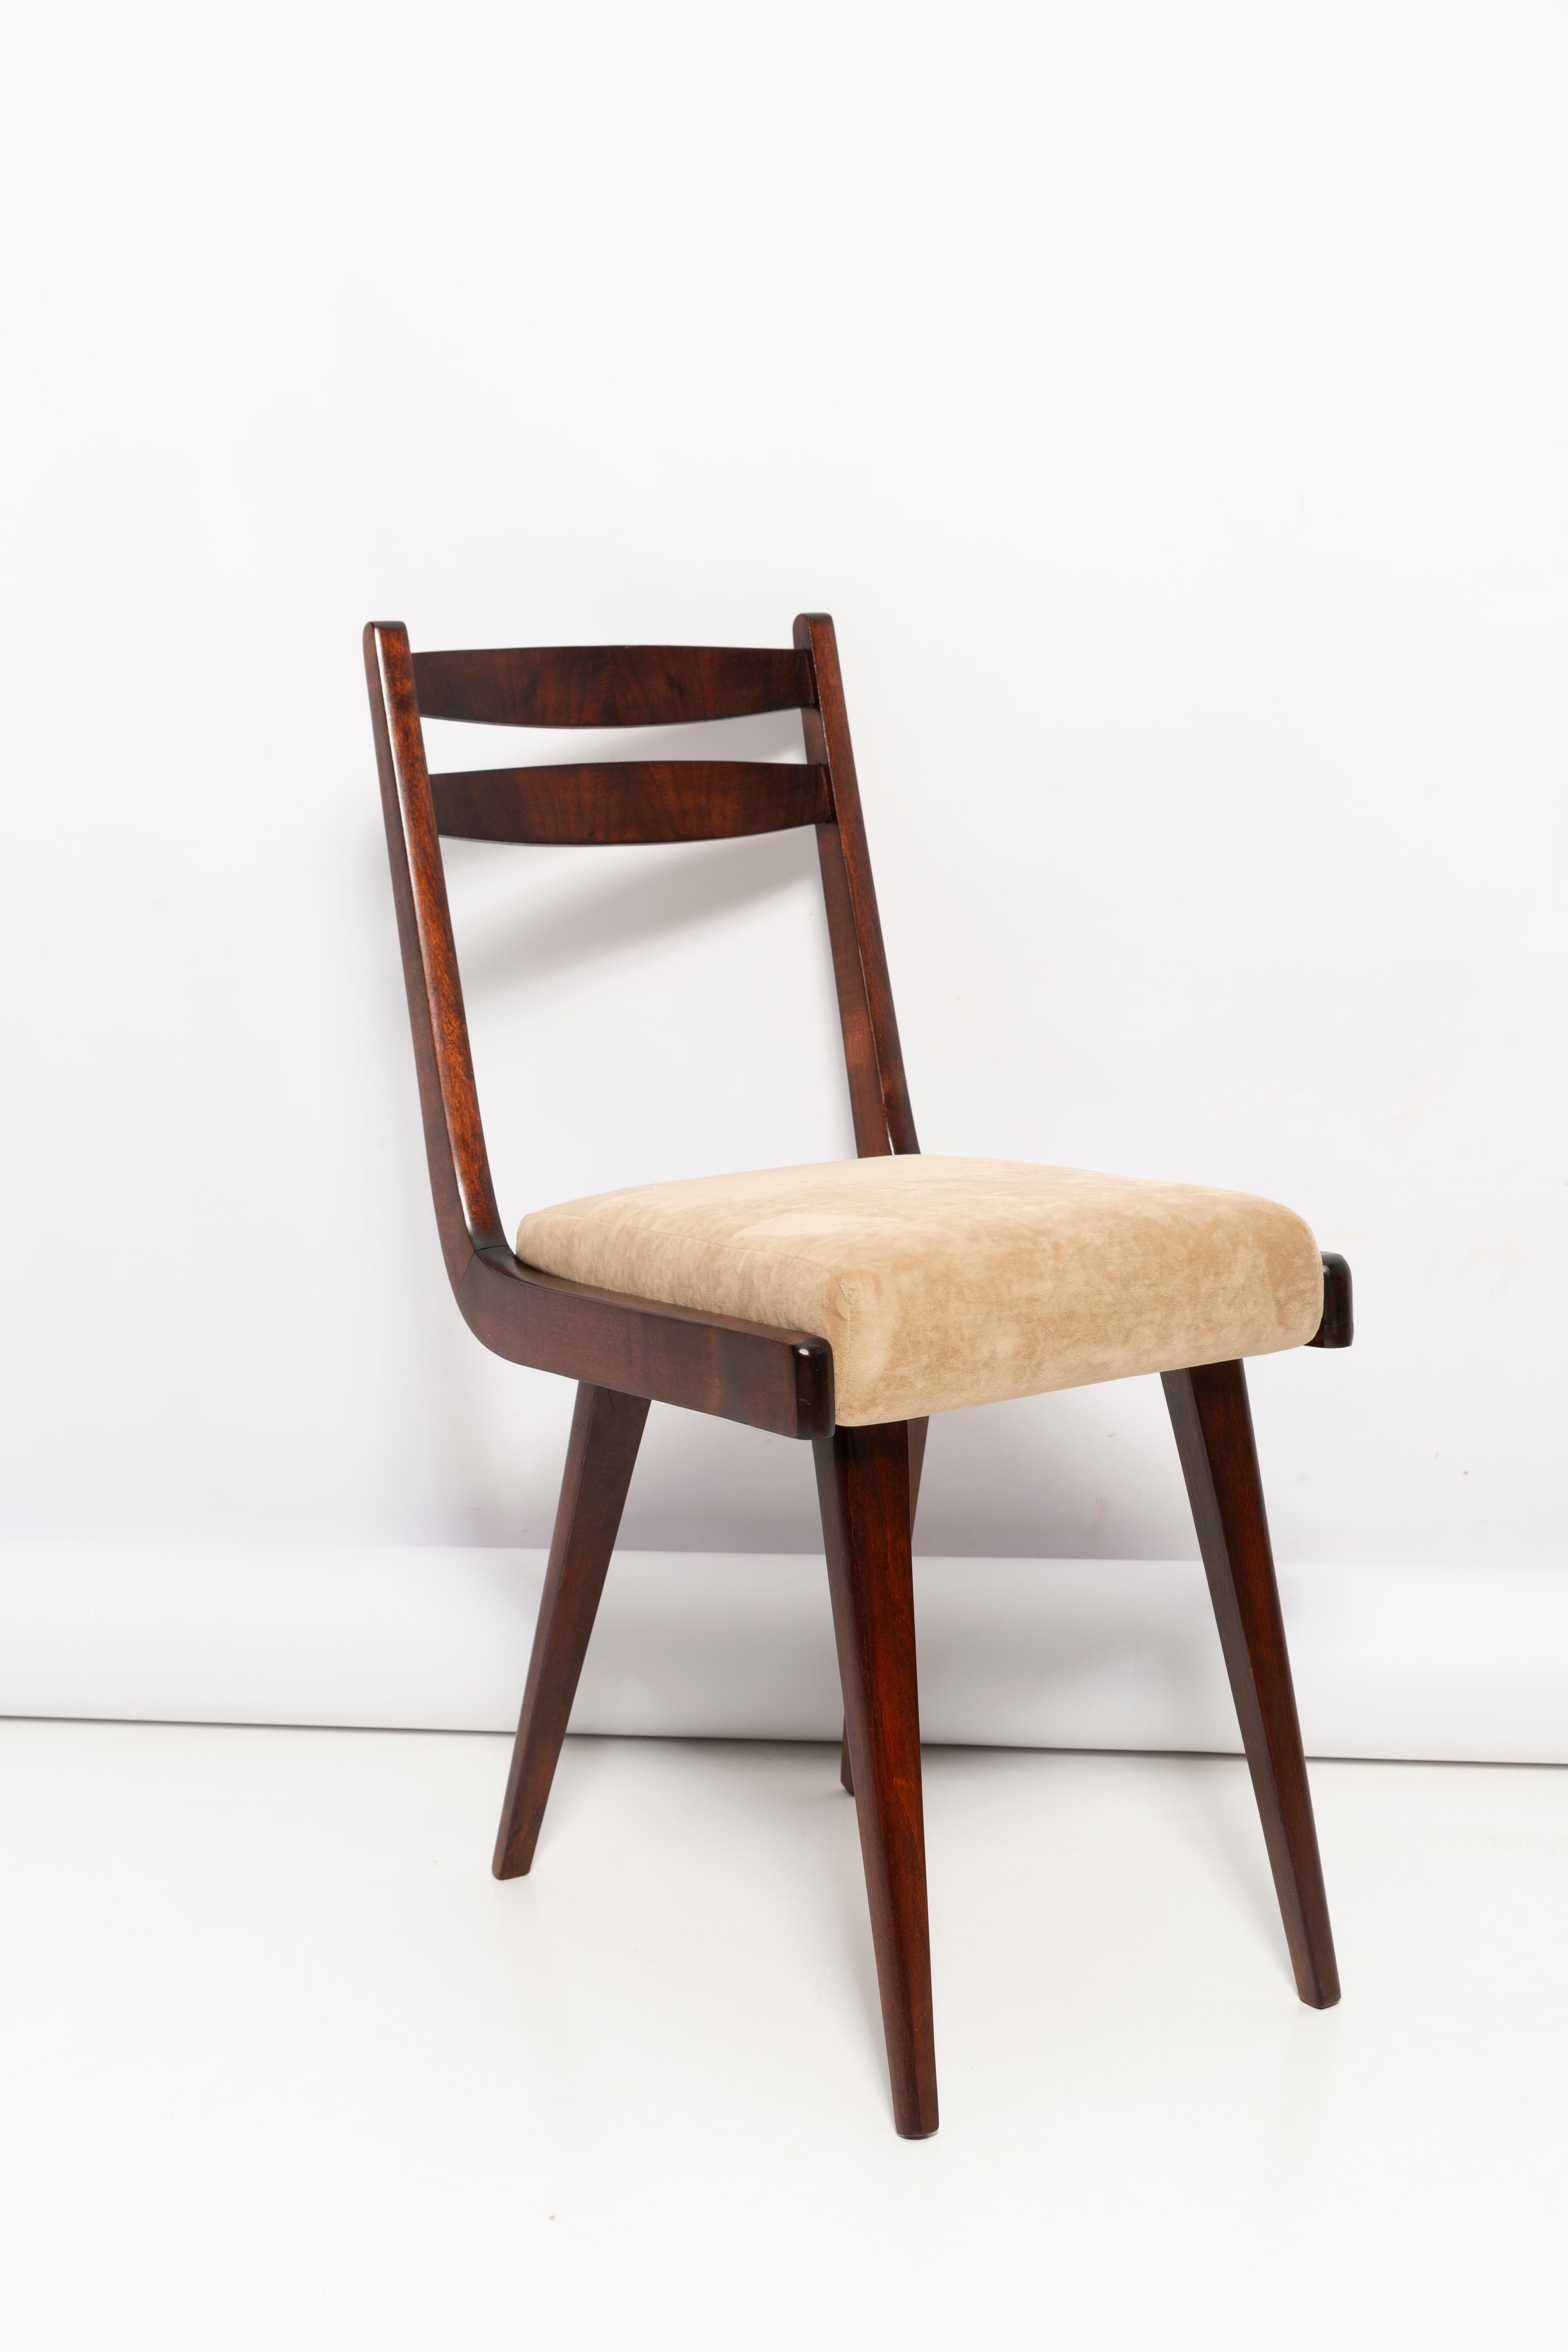 Chairs designed by prof. Rajmund Halas. They have been made of beechwood. They have undergone a complete upholstery renovation, the woodwork has been refreshed. Seats were dressed in beige soft velvet. They are stabile and very shapely. Chairs were